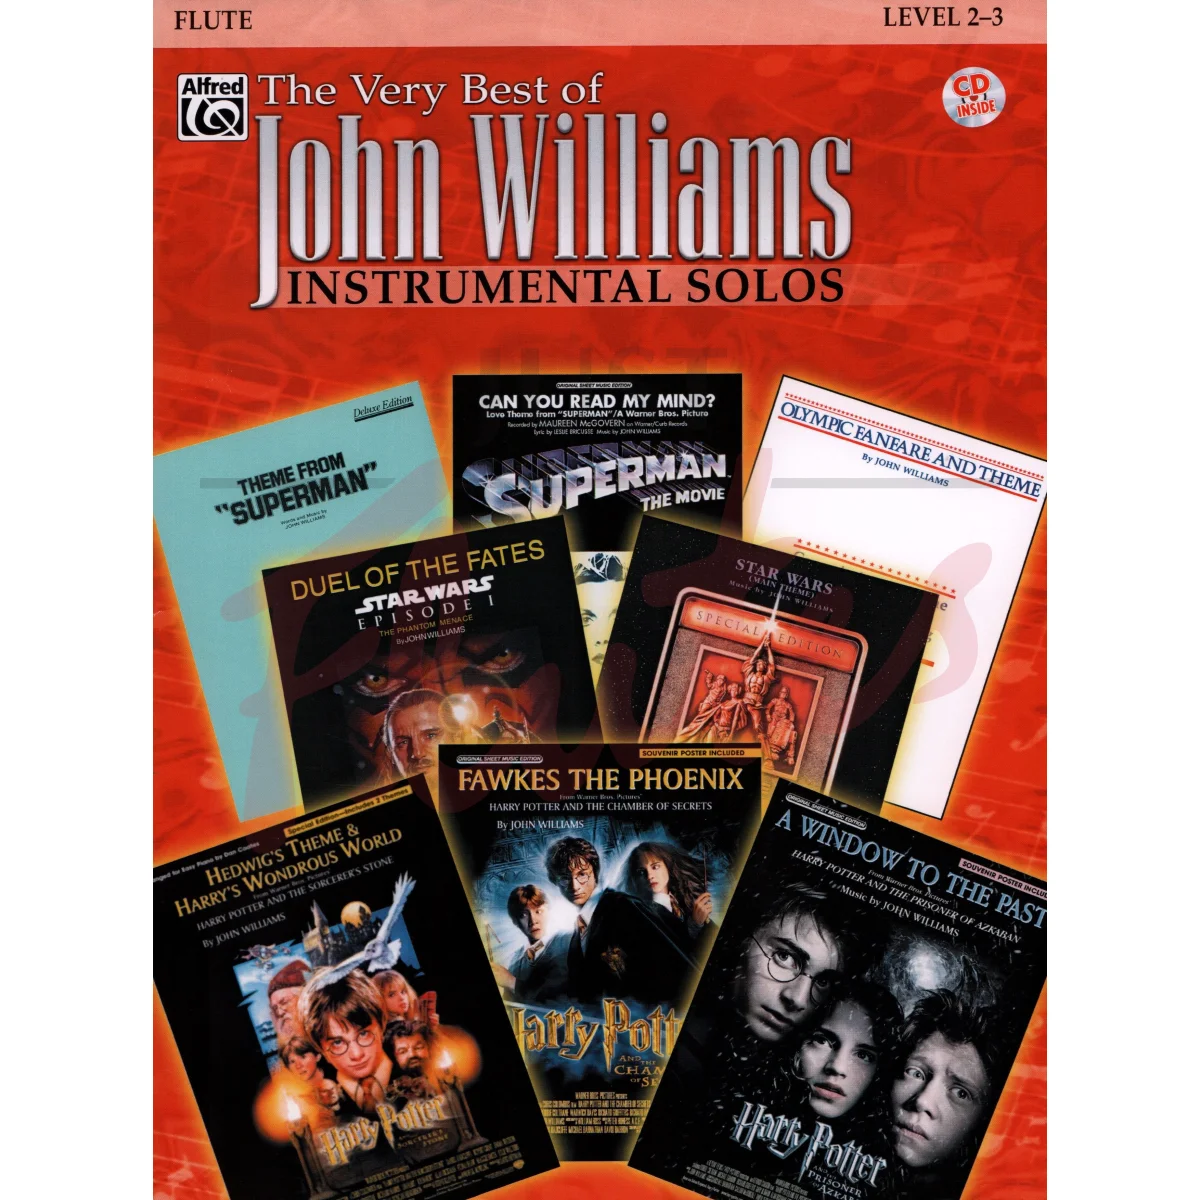 The Very Best of John Williams for Flute